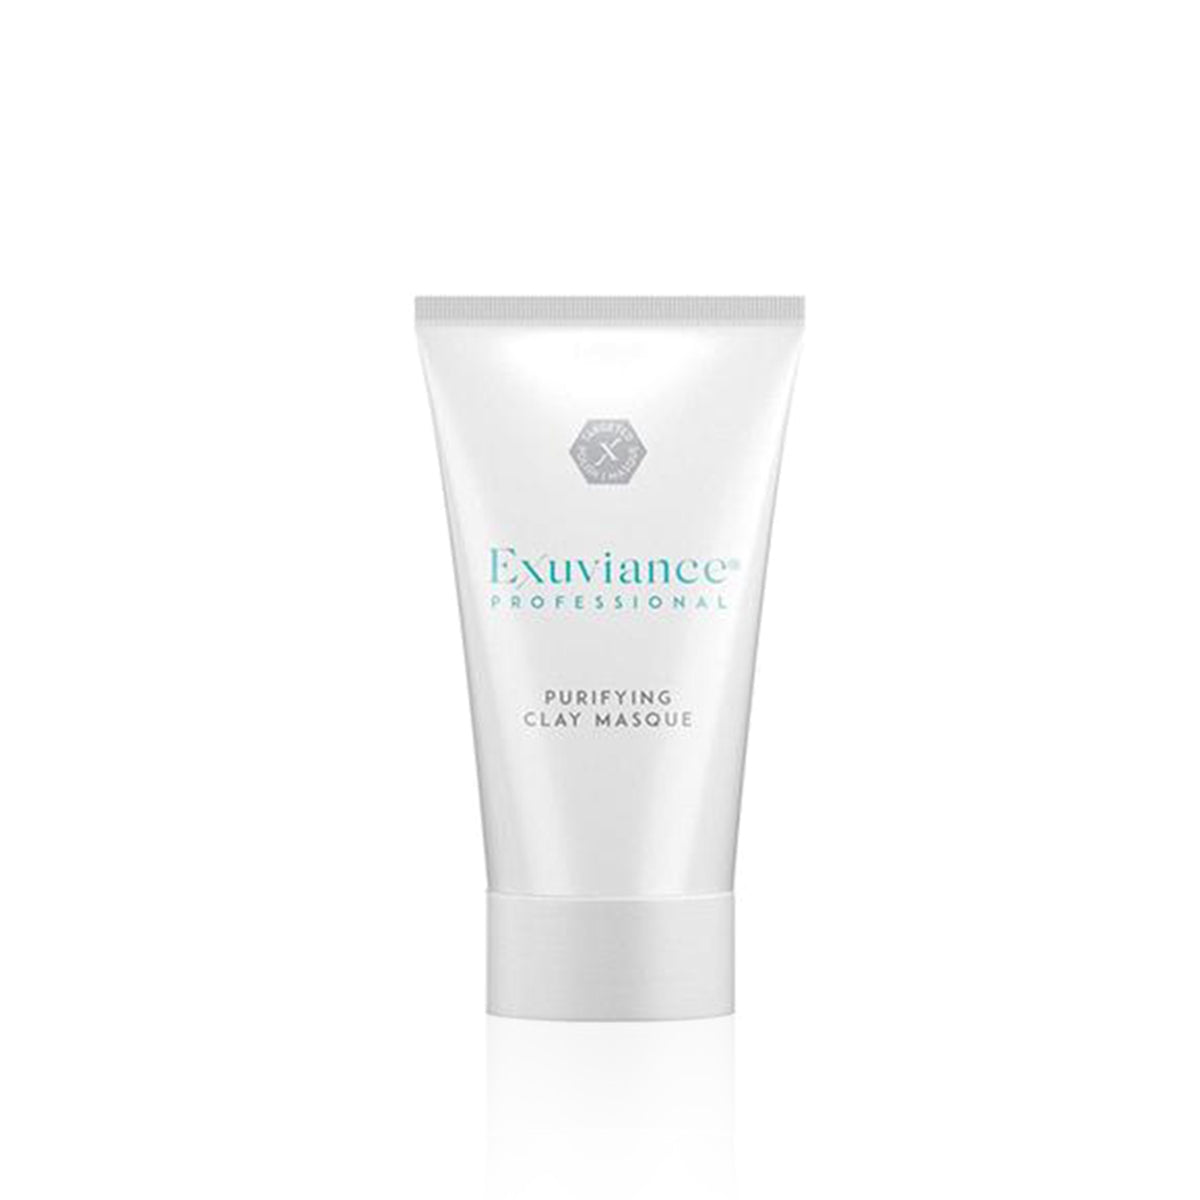 Exuviance 深層潔淨更生面膜 | Purifying Clay Masque 50g